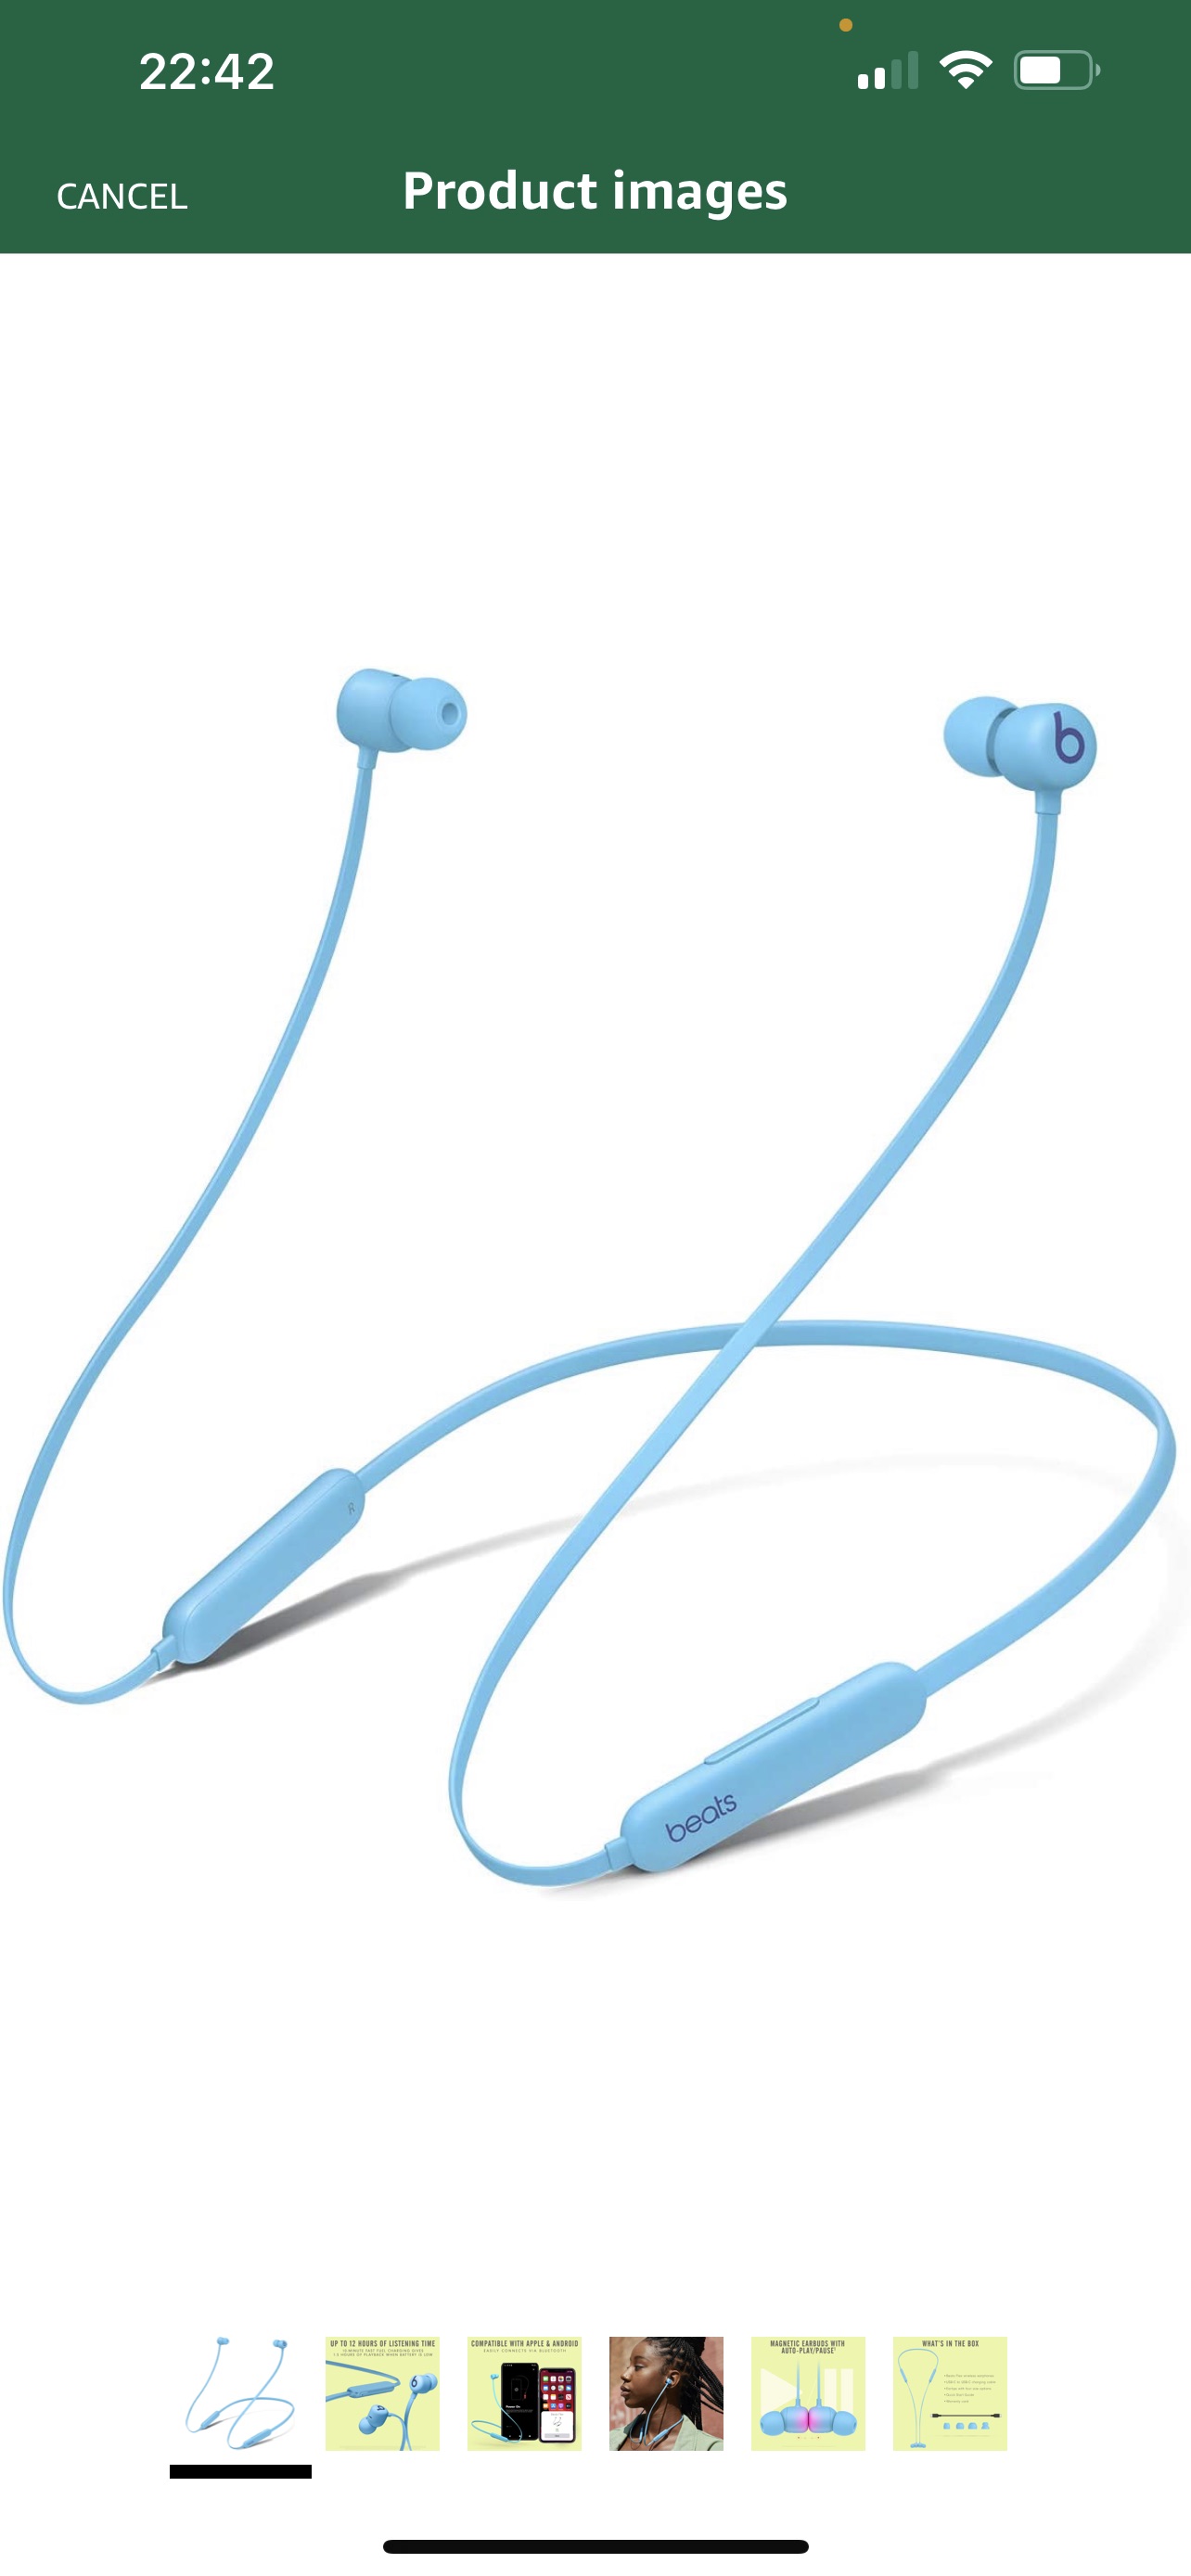 Amazon.com: Beats Flex Wireless Earbuds - Apple W1 Headphone Chip, Magnetic Earphones, Class 1 Bluetooth, 12 Hours of Listening Time, Built-in Microphone - Flame Blue : Everything Else